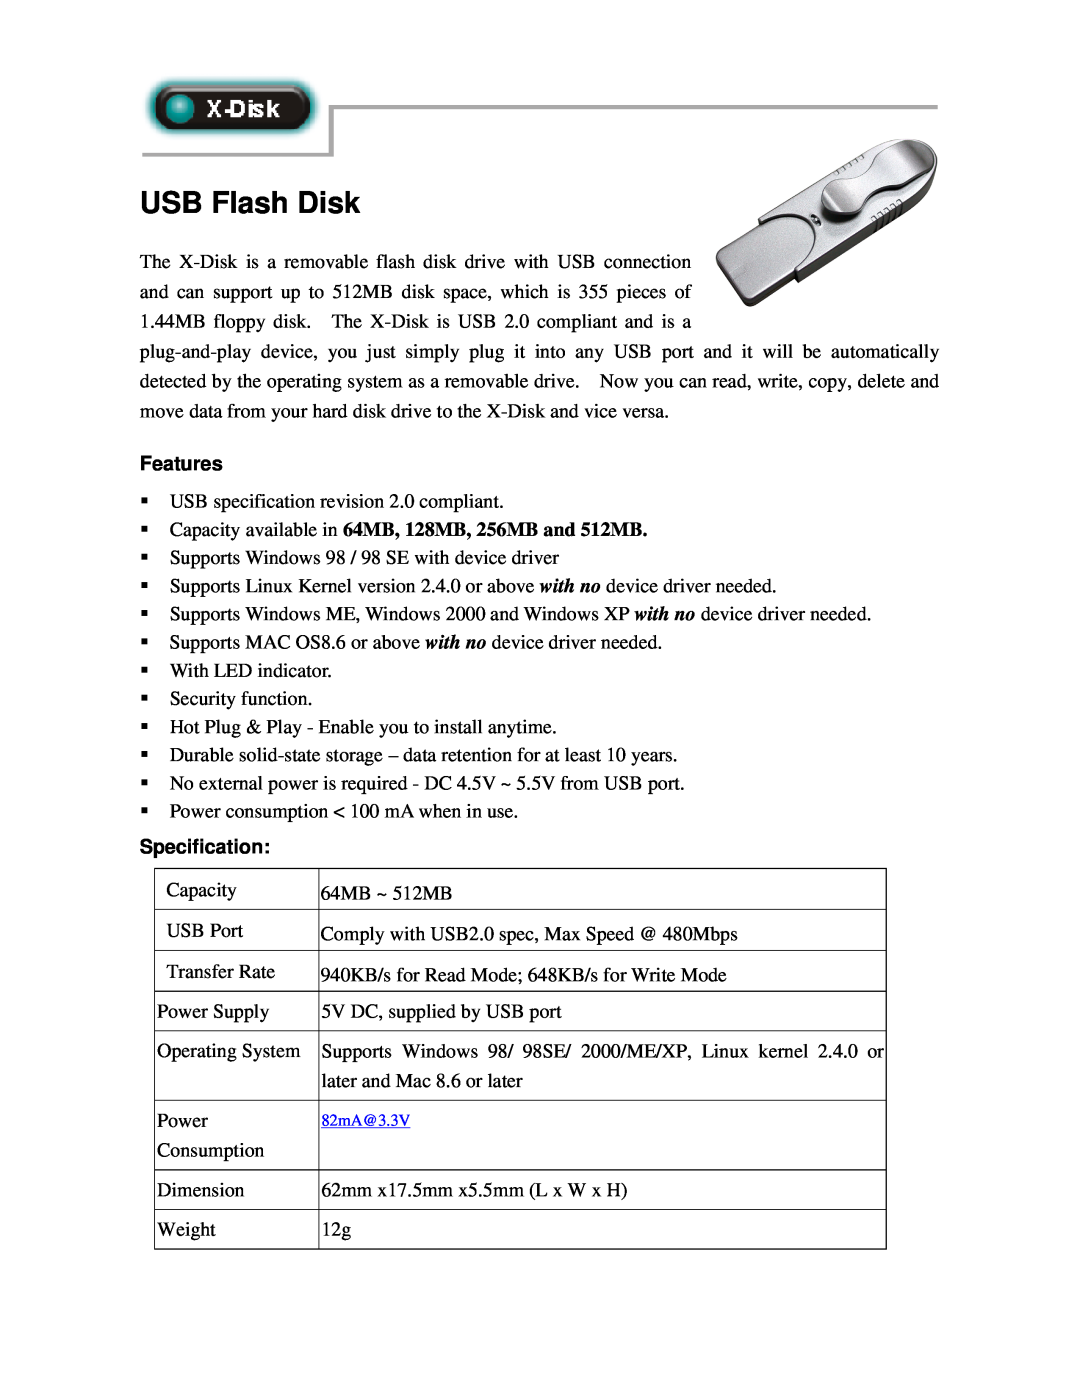 Abocom X-Disk manual USB Flash Disk, Features, Capacity available in 64MB, 128MB, 256MB and 512MB, Specification 